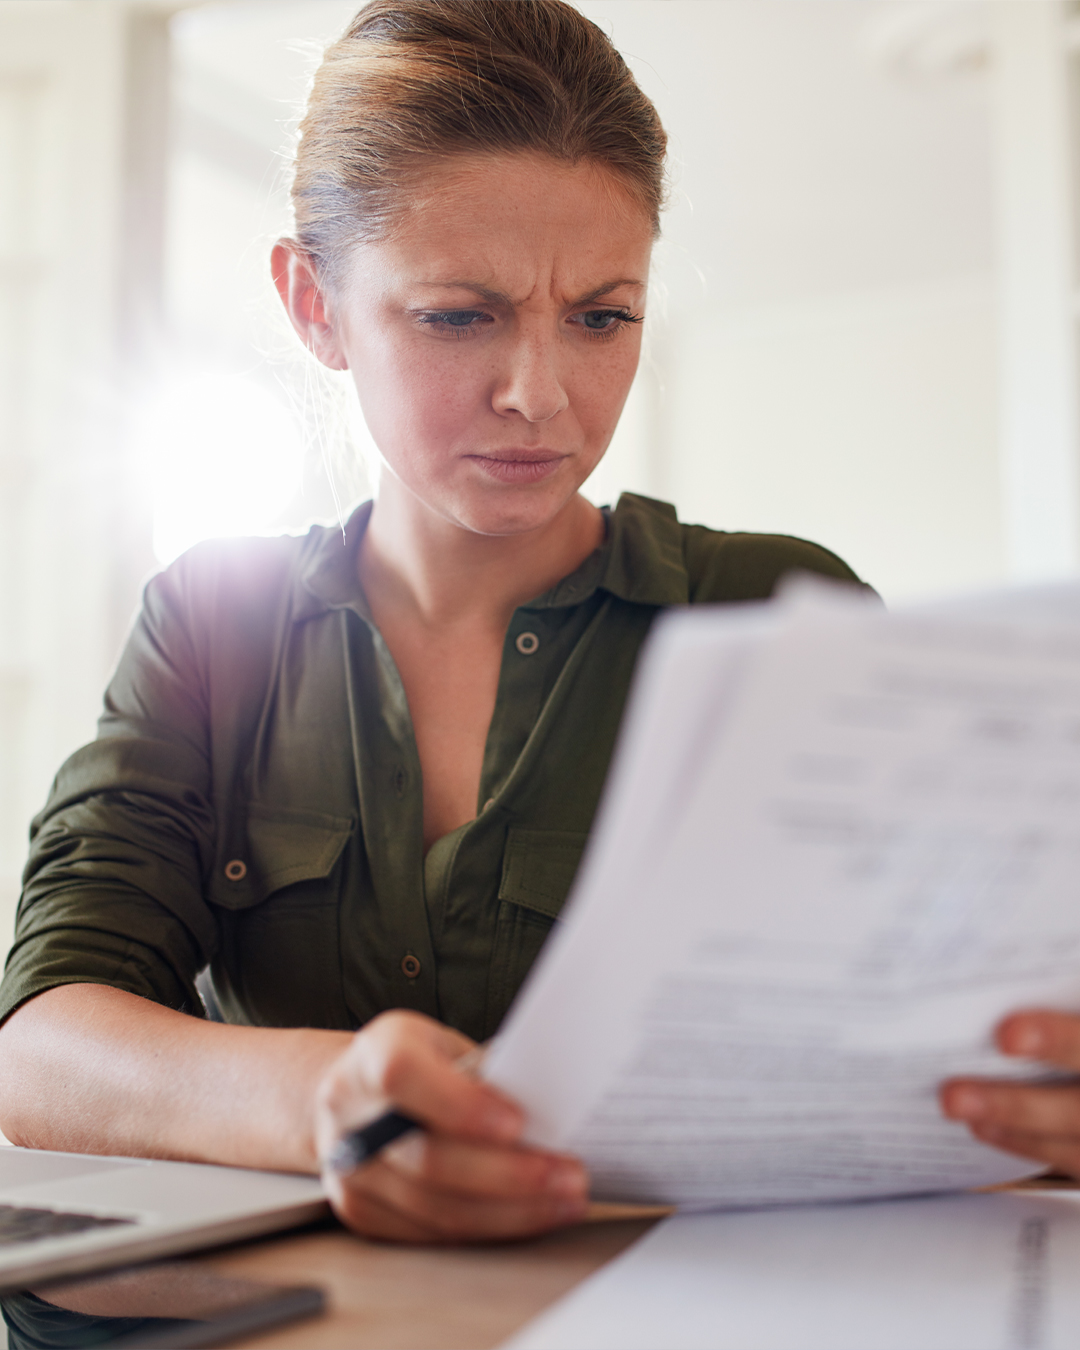 Woman looks at papers with concern